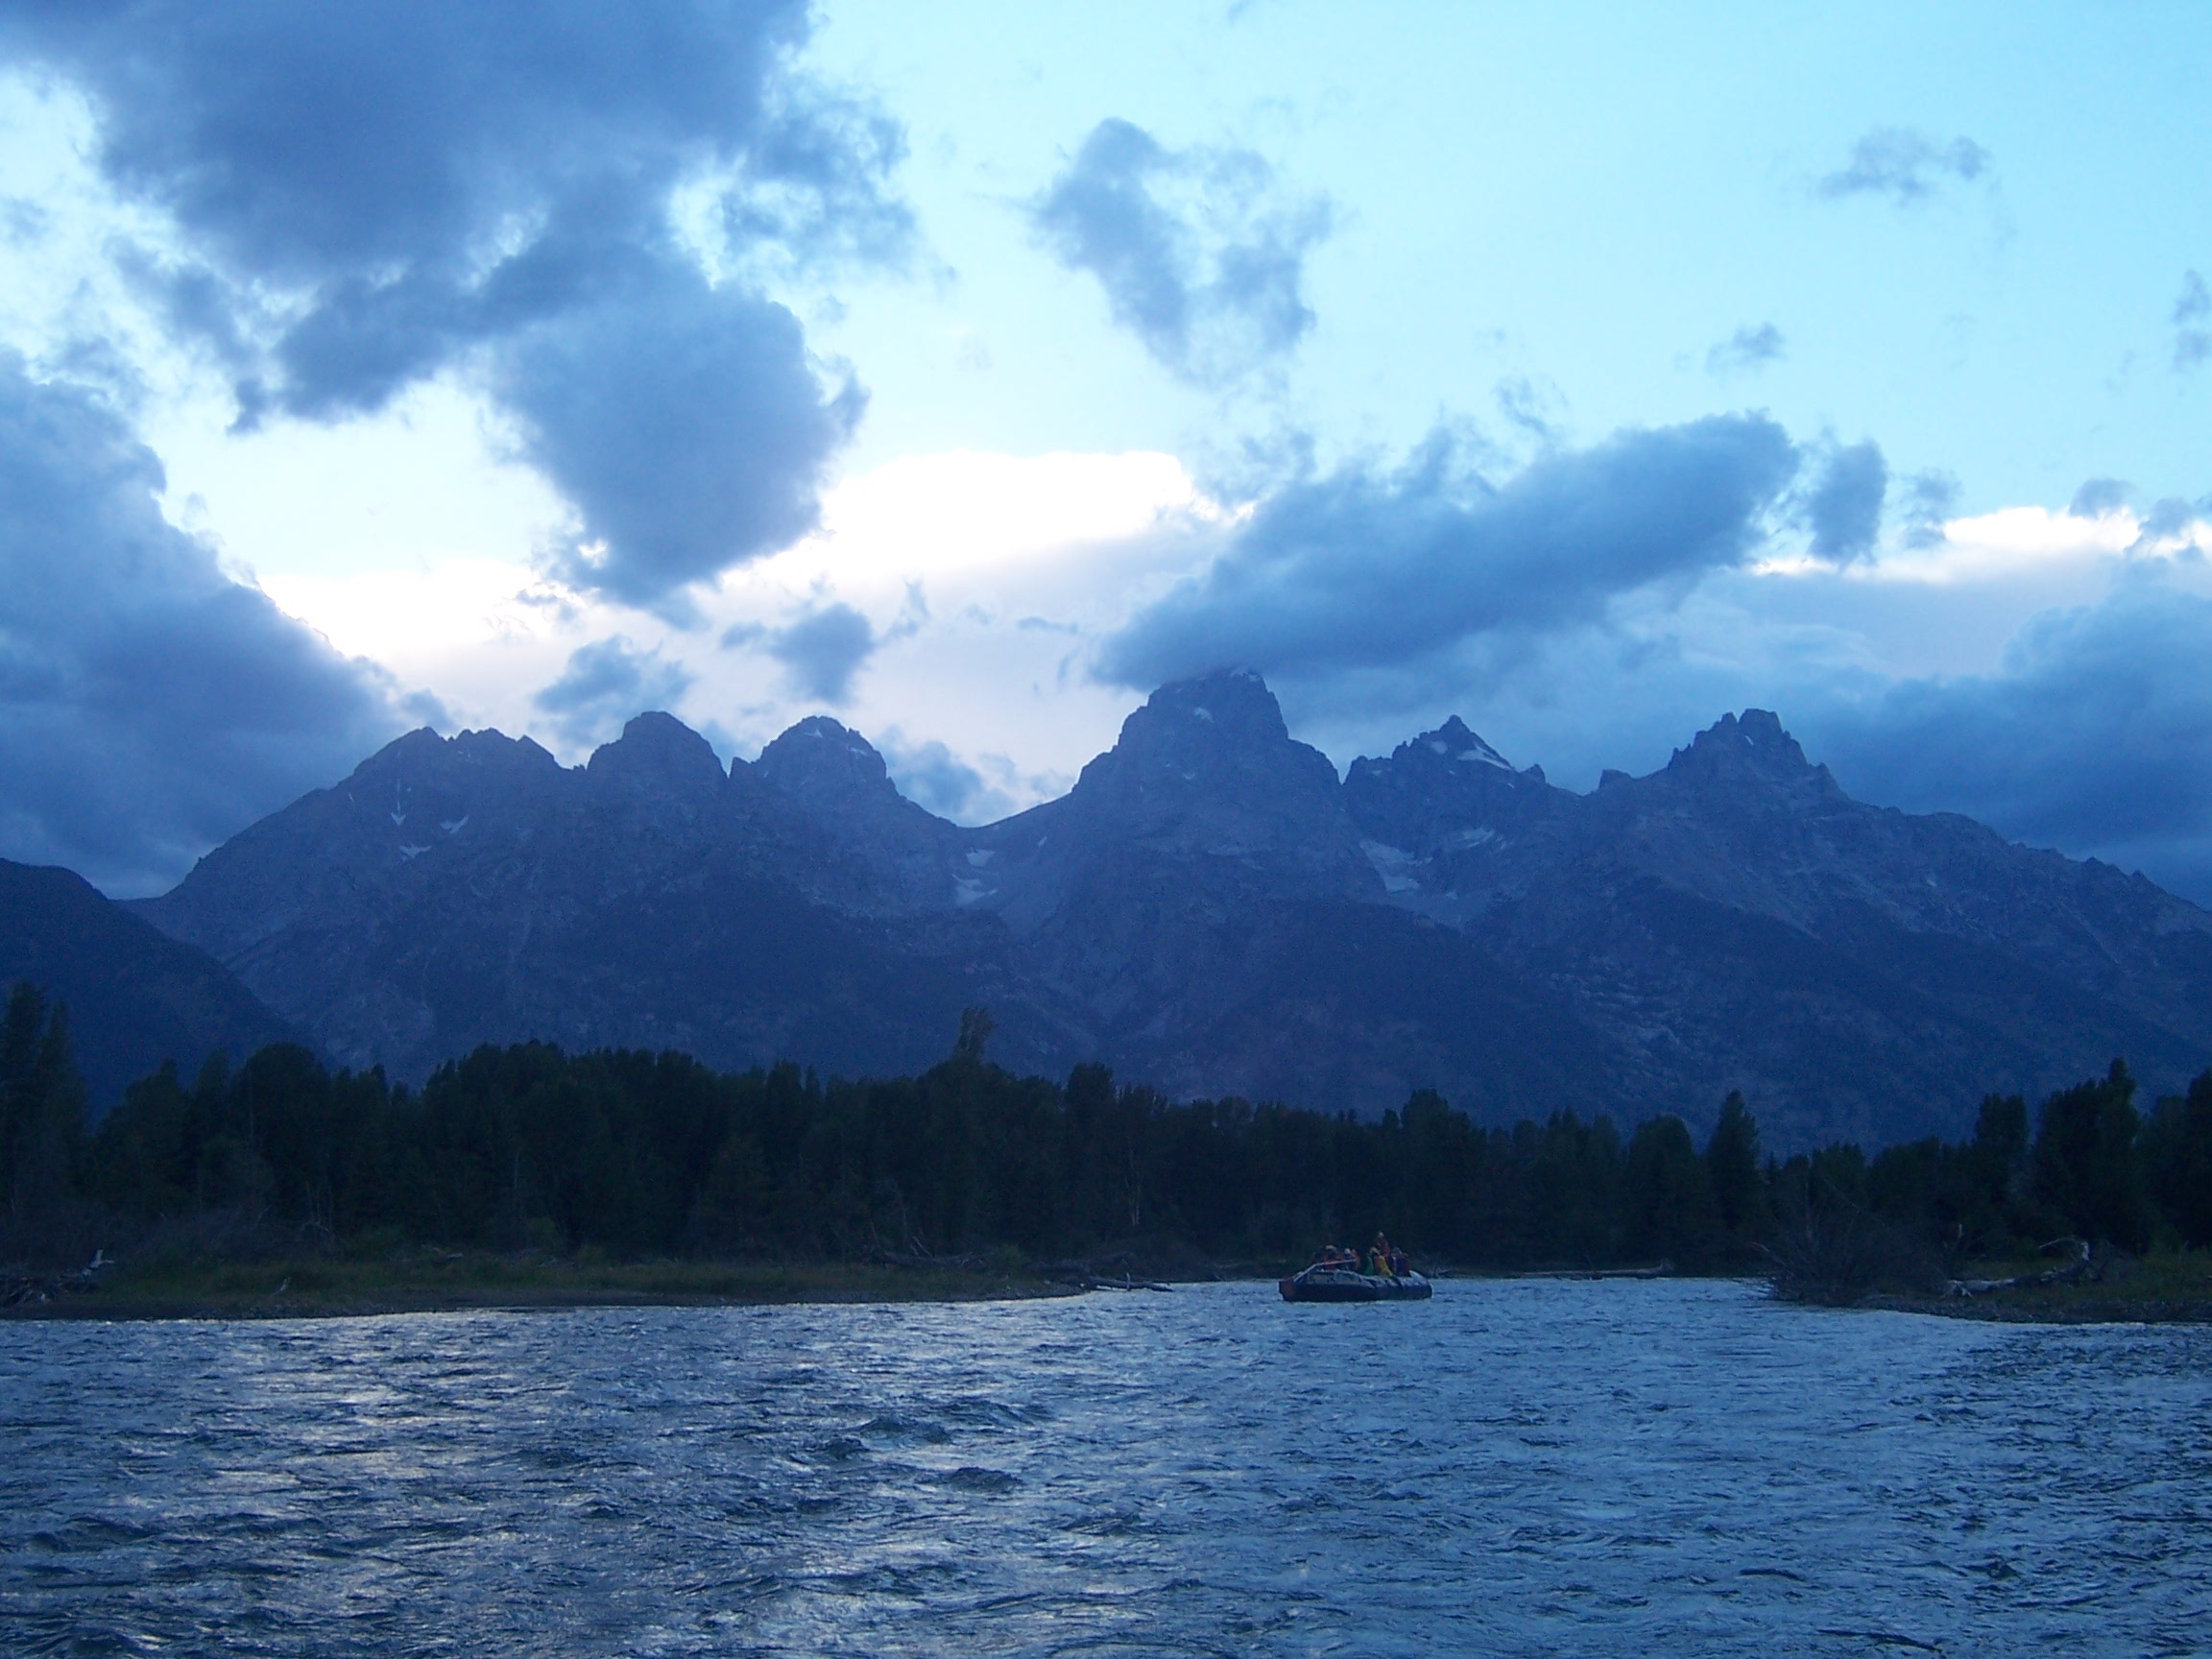 Slow rafting on Snake River. Teton Range in the background. Bad weather coming.